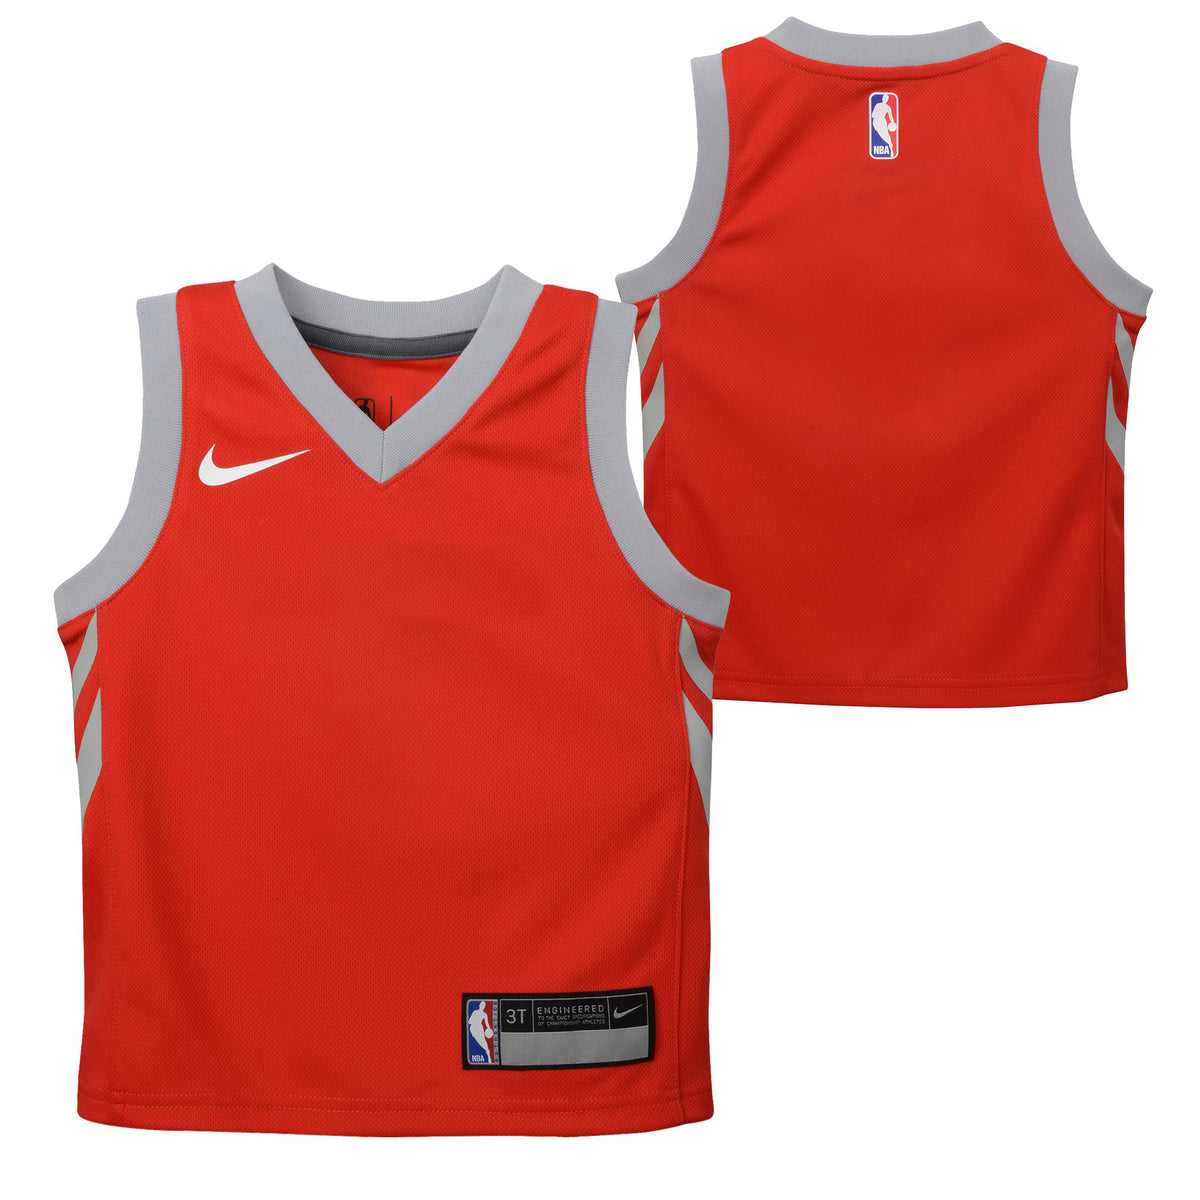 Outerstuff NBA Toddlers (2T-4T) Replica Icon Blank Jersey